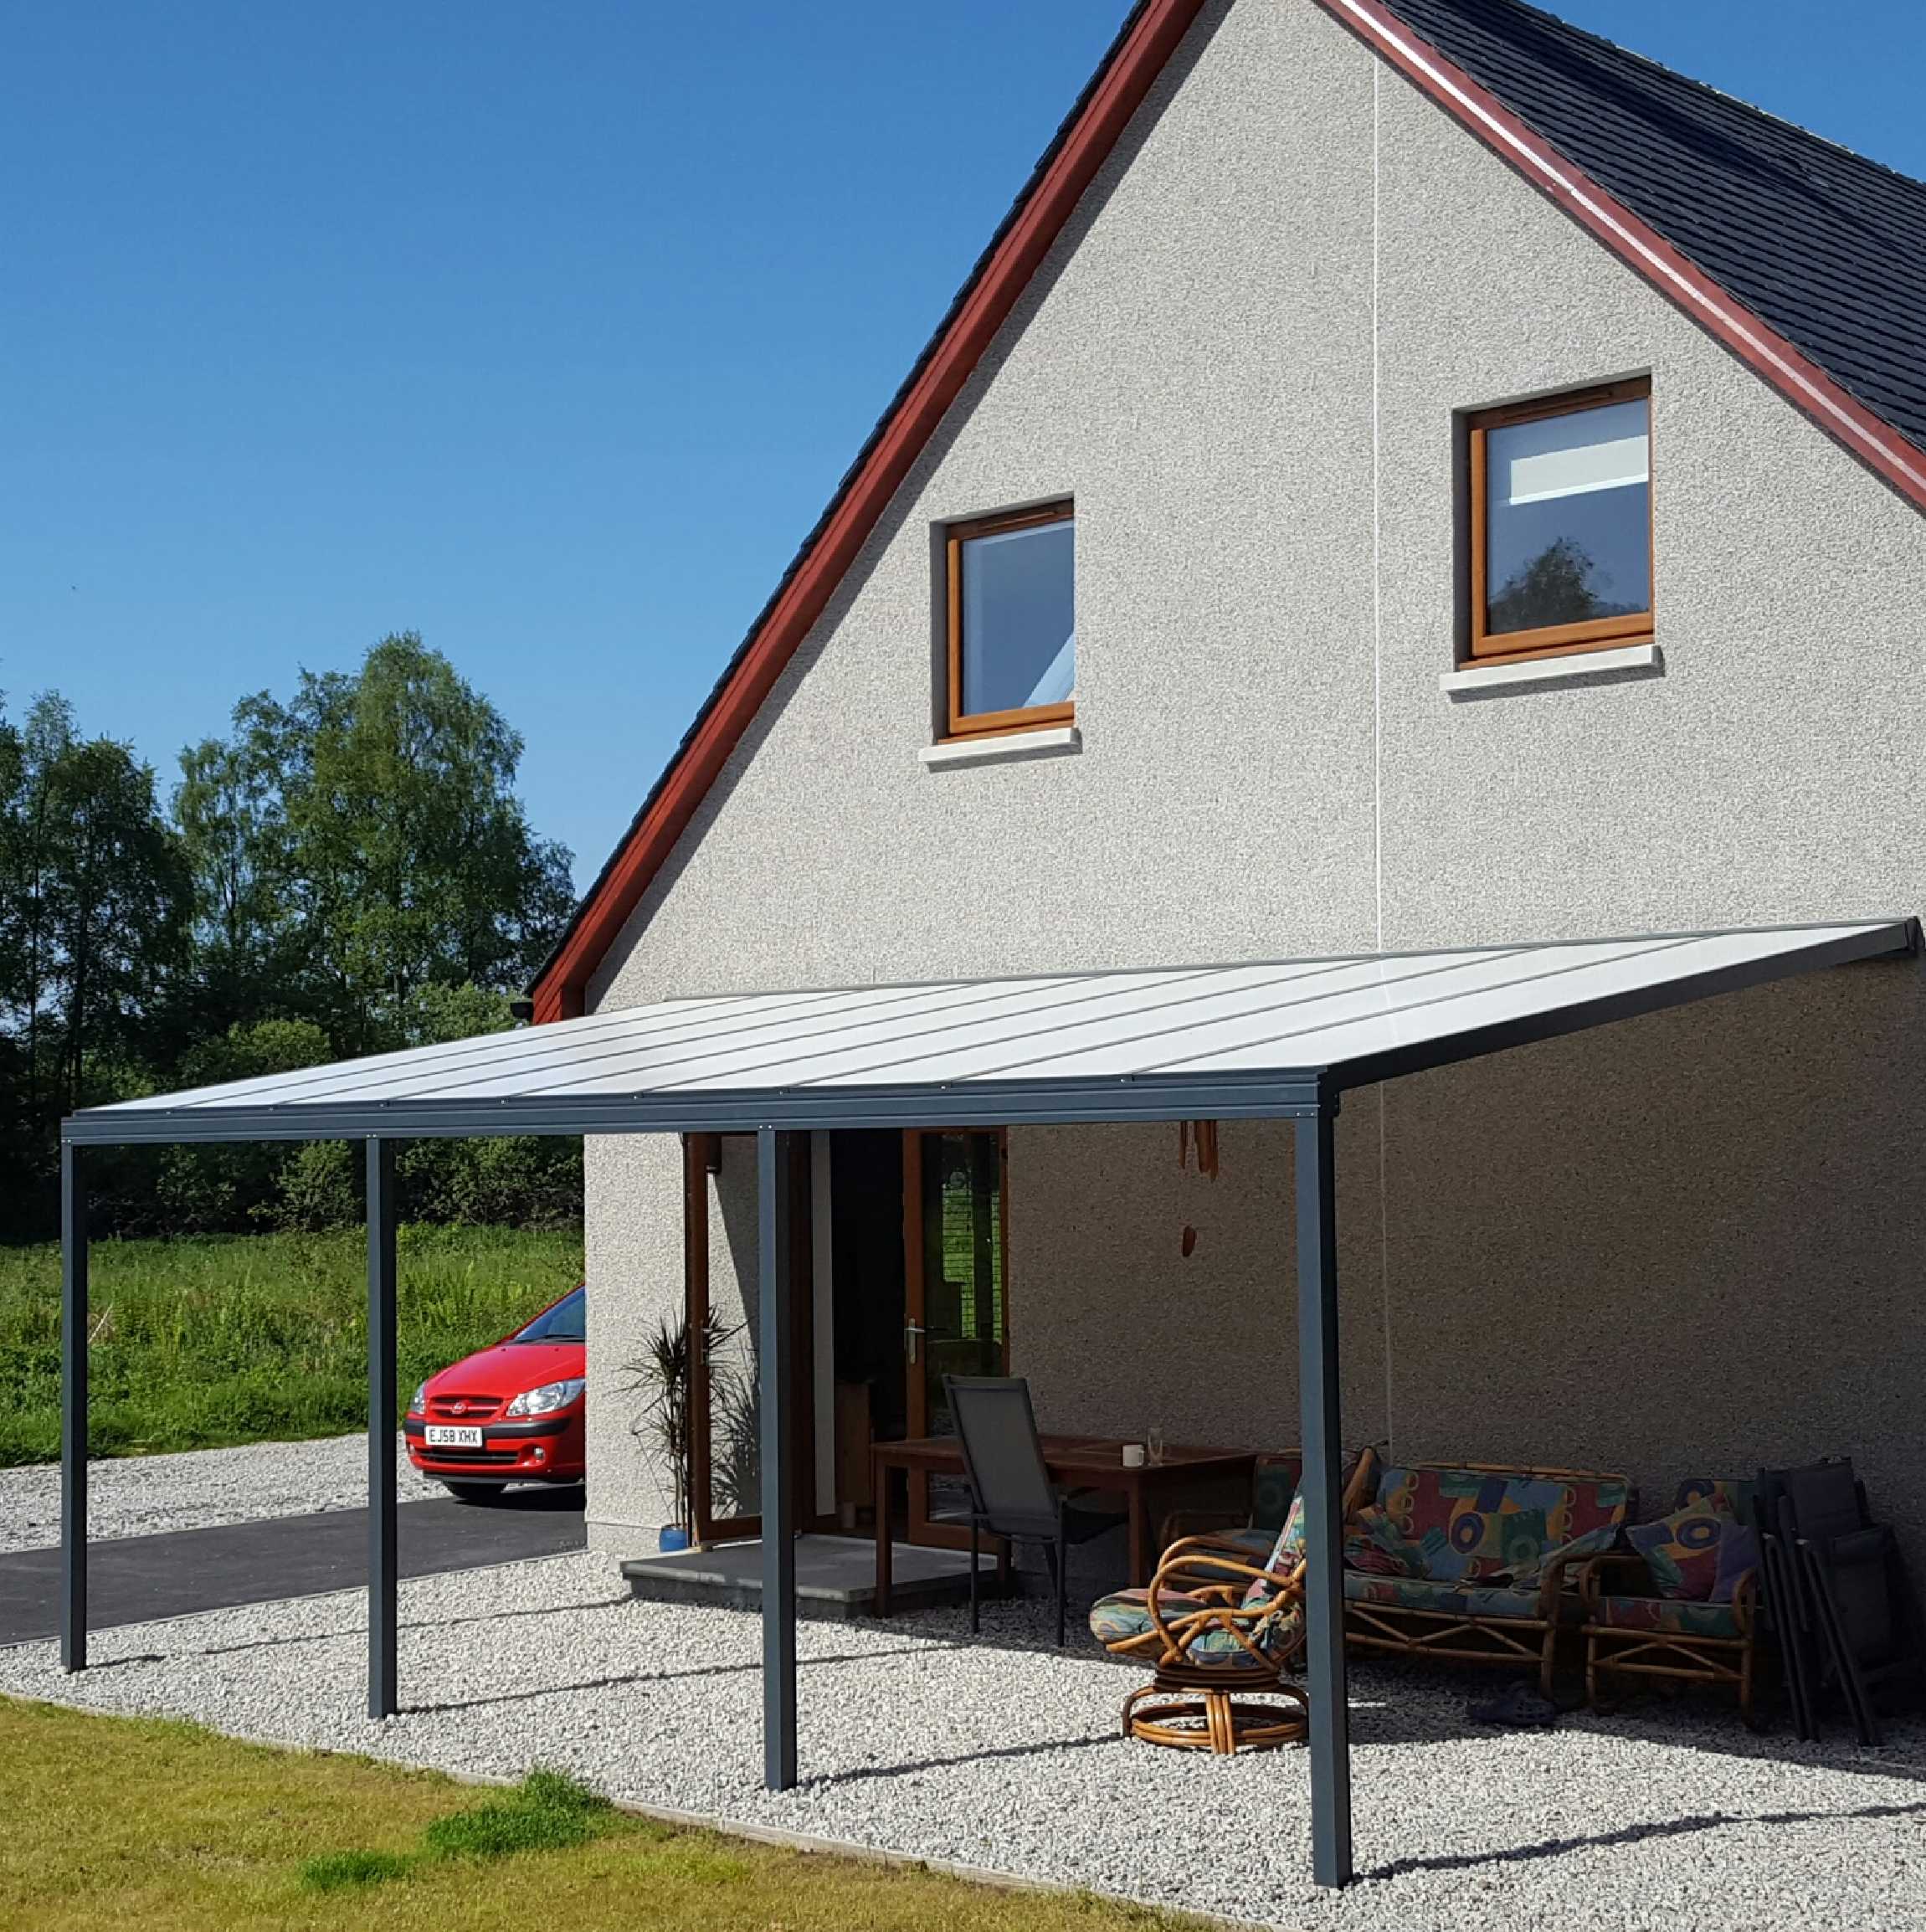 Great selection of SPECIAL OFFER Omega Smart Lean-To Canopy, Anthracite Grey, 16mm Polycarbonate Glazing - 3.1m (W) x 3.0m (P), (2) Supporting Posts